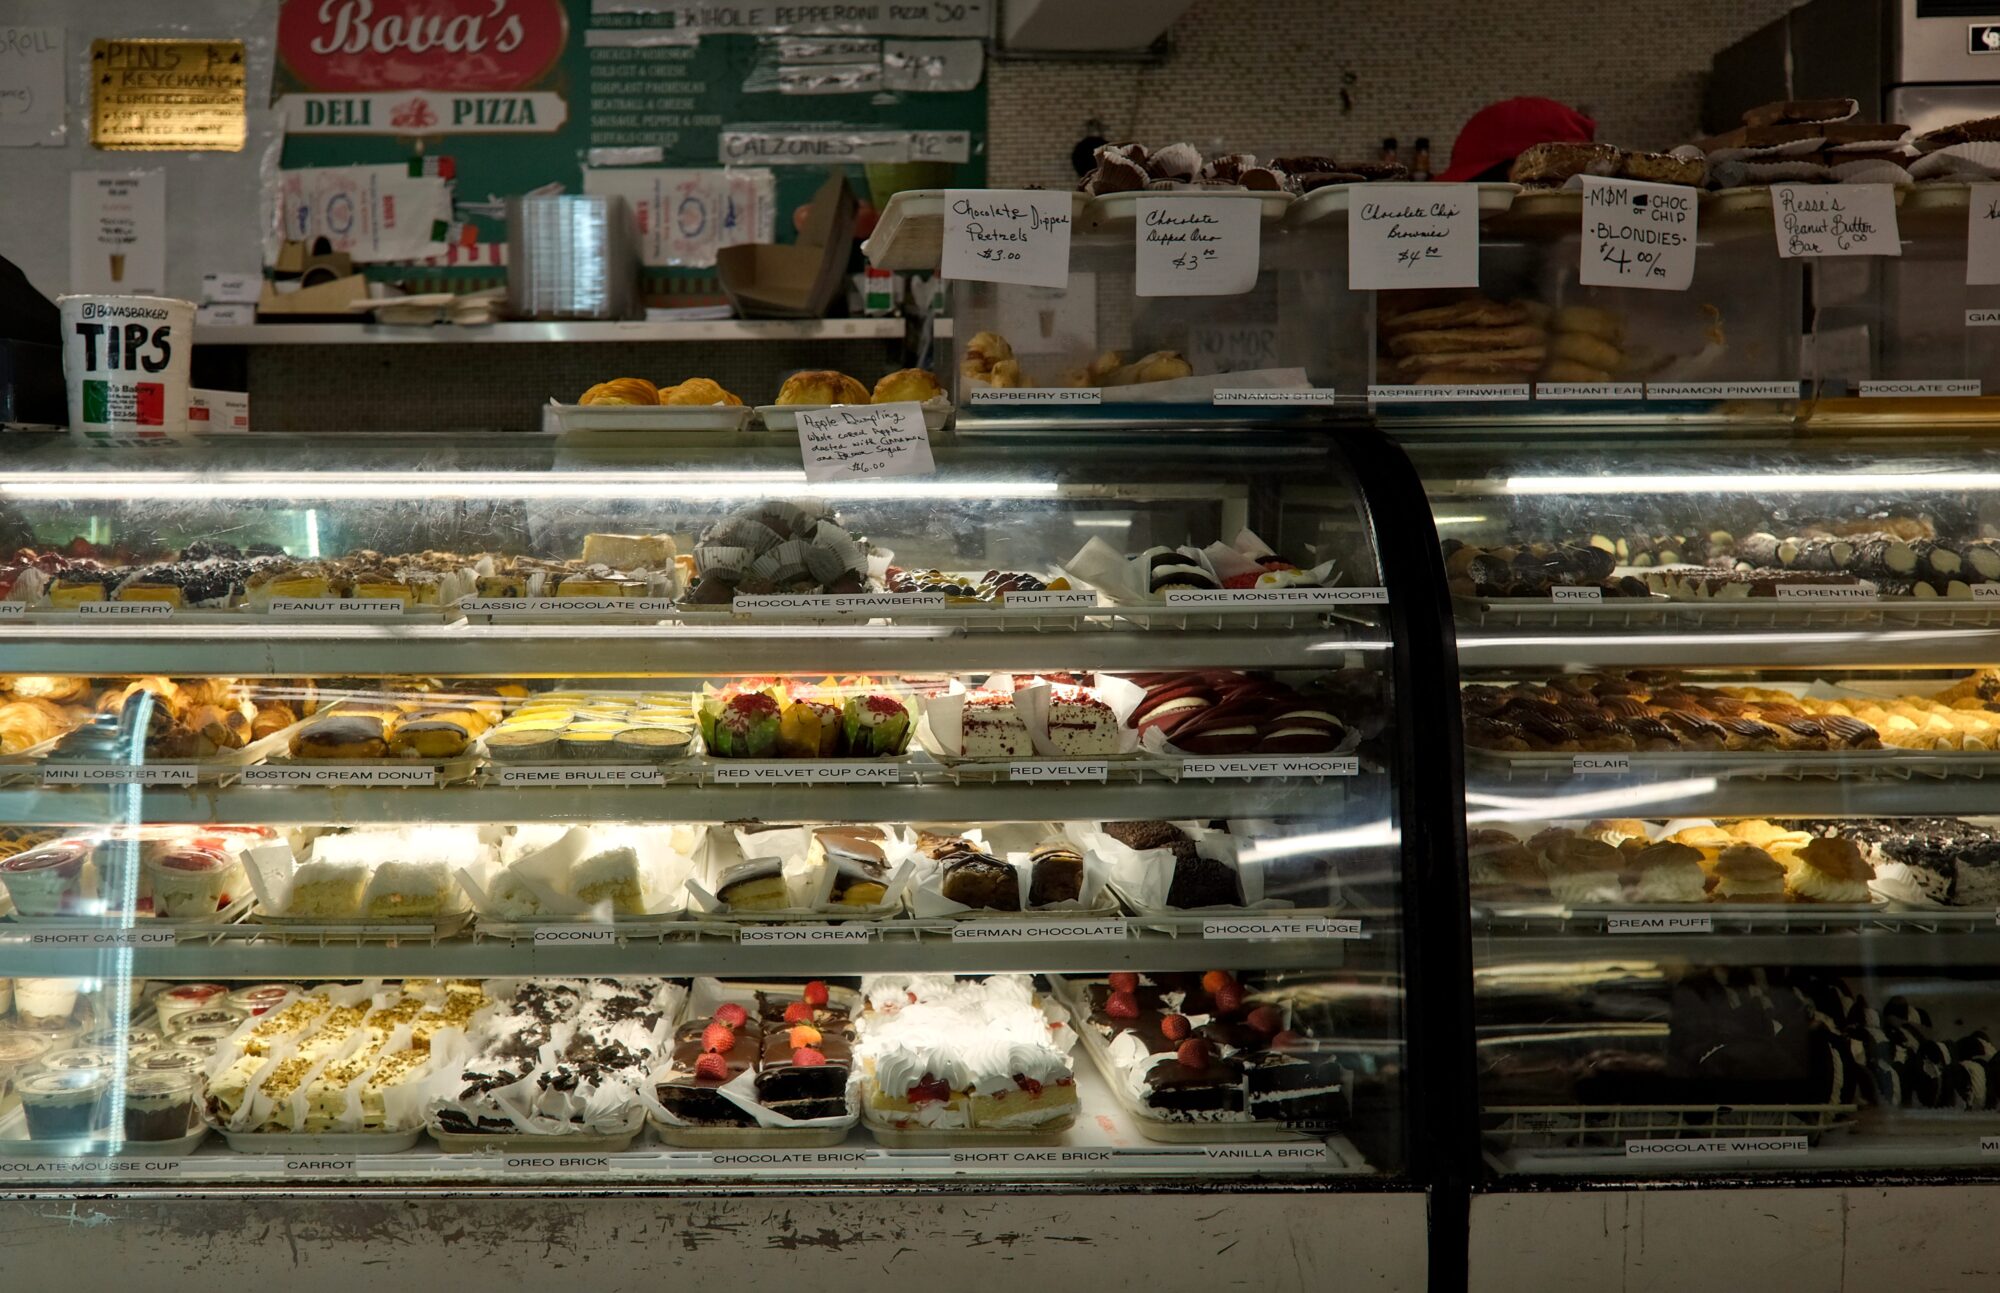 Cookie Case at Bova's Bakery